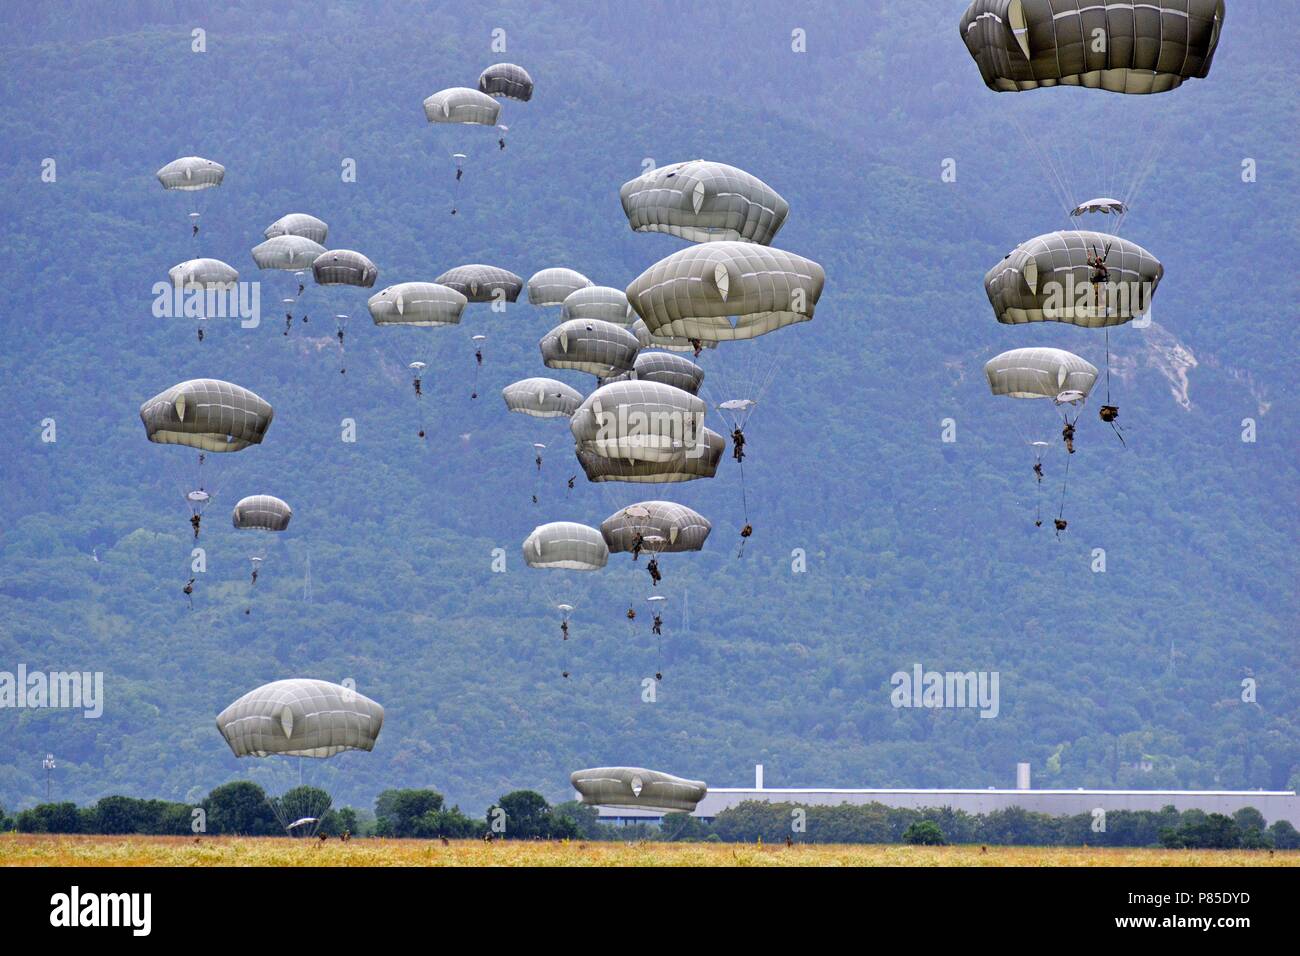 U.S. Army Paratroopers assigned to the 2nd Battalion, 503rd Infantry Regiment, 173rd Airborne Brigade, descend onto Juliet Drop Zone in Pordenone, Italy, June 13, 2018, during Exercise Bayonet Strike East, June 13, 2018. The 173rd Airborne Brigade is the U.S. Army Contingency Response Force in Europe, capable of projecting ready forces anywhere in the U.S. European, Africa or Central Commands' areas of responsibility. (U.S. Army photo by Paolo Bovo). () Stock Photo